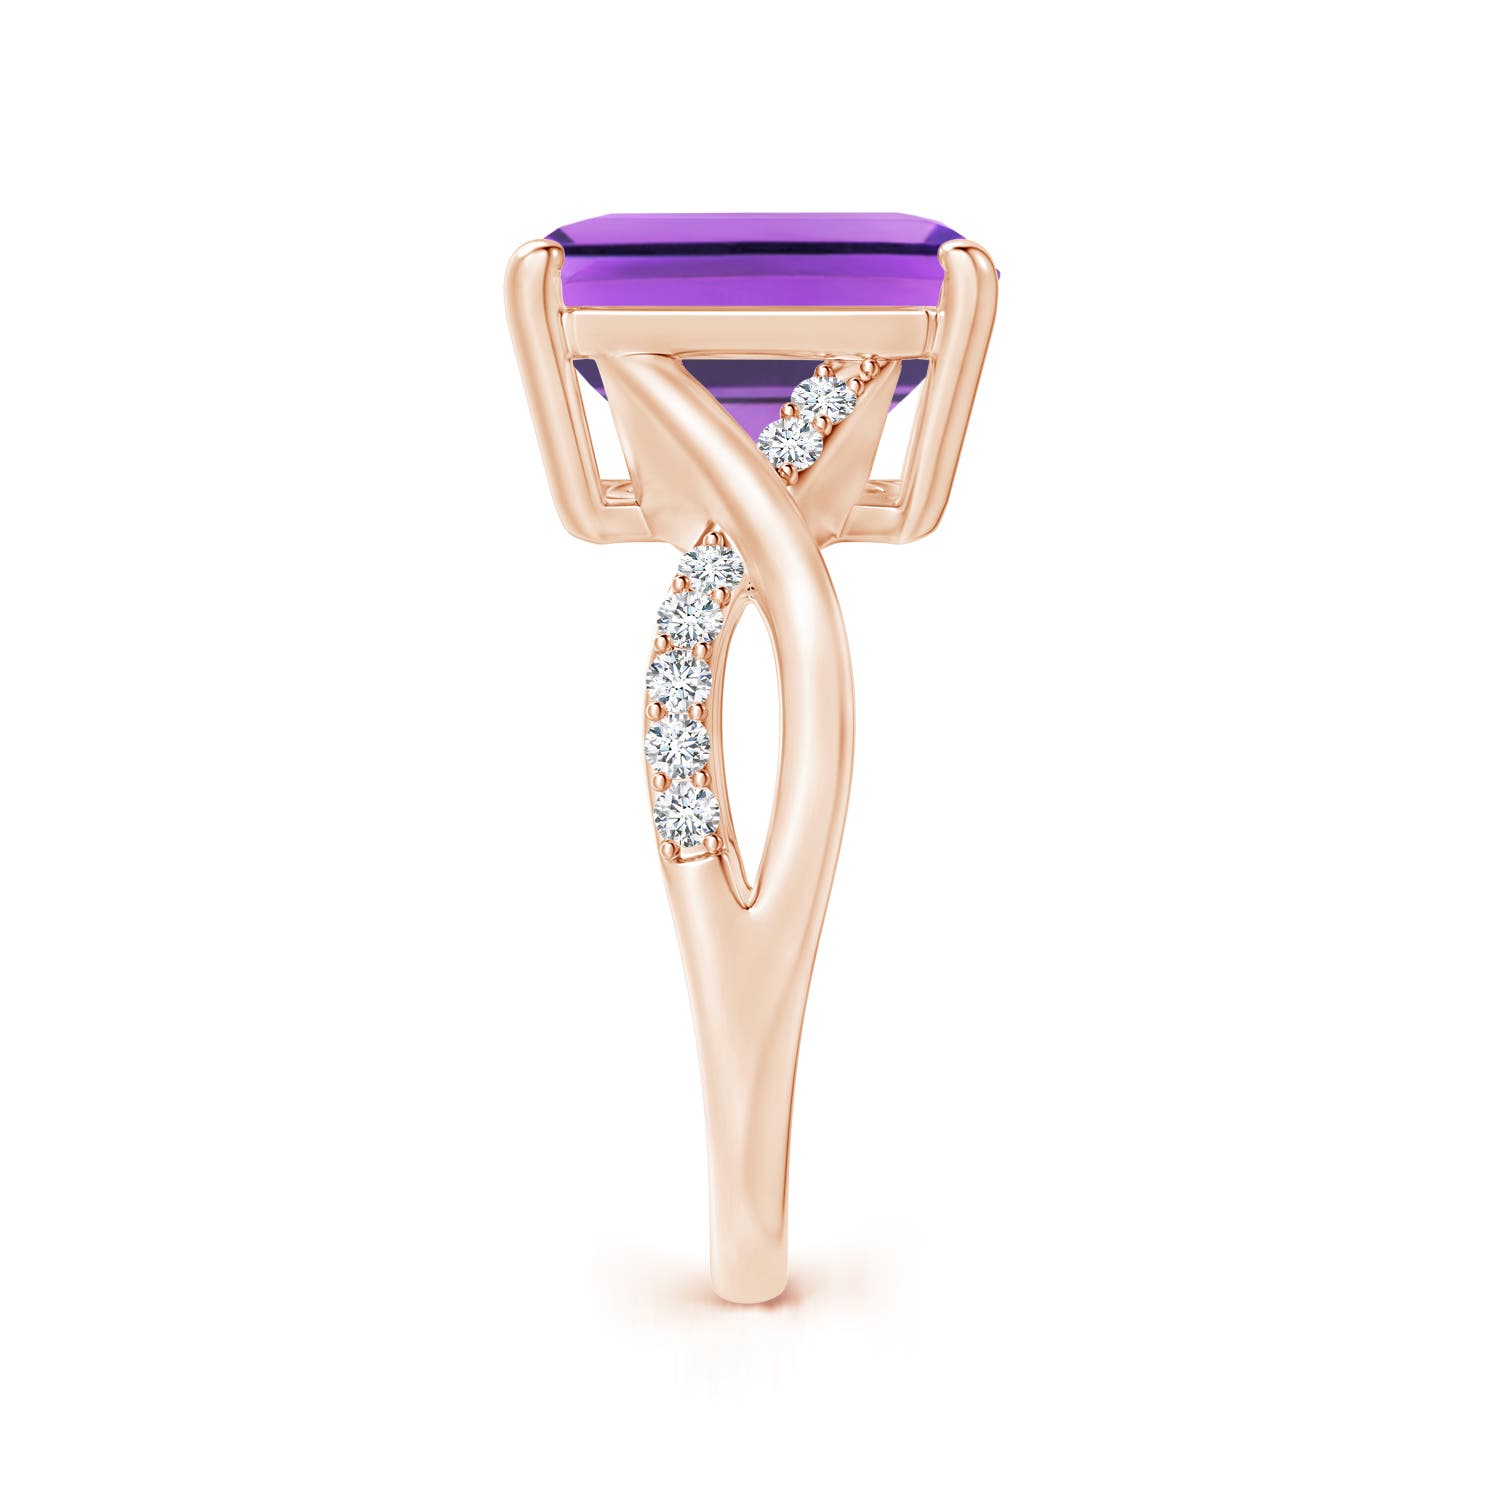 AA - Amethyst / 5.47 CT / 14 KT Rose Gold